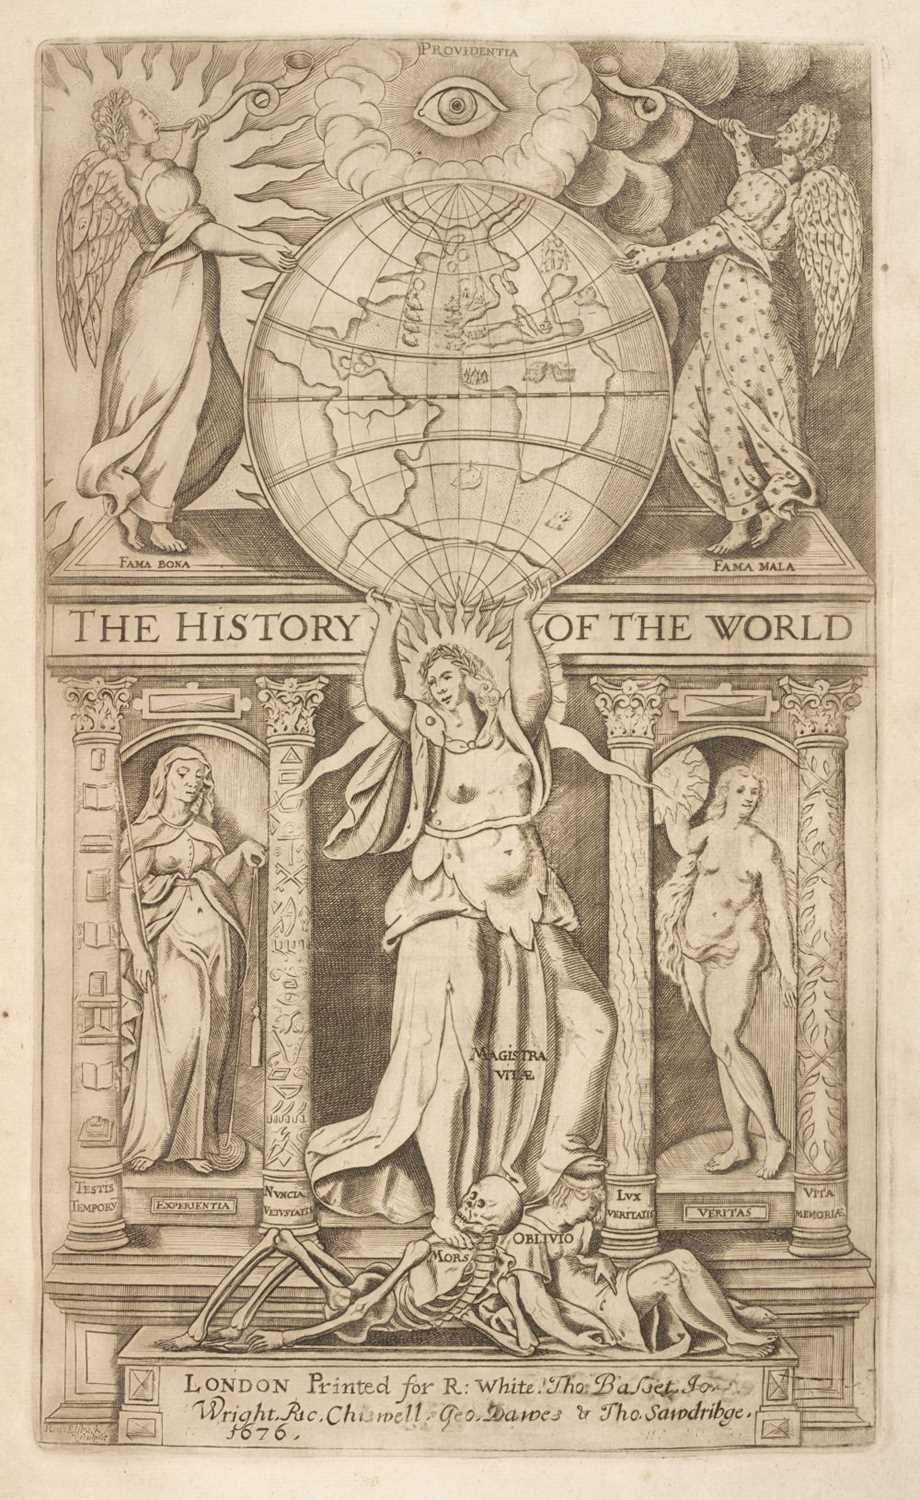 Lot 9 - Raleigh (Walter). The History of the World in Five Books, London: Robert White, 1677